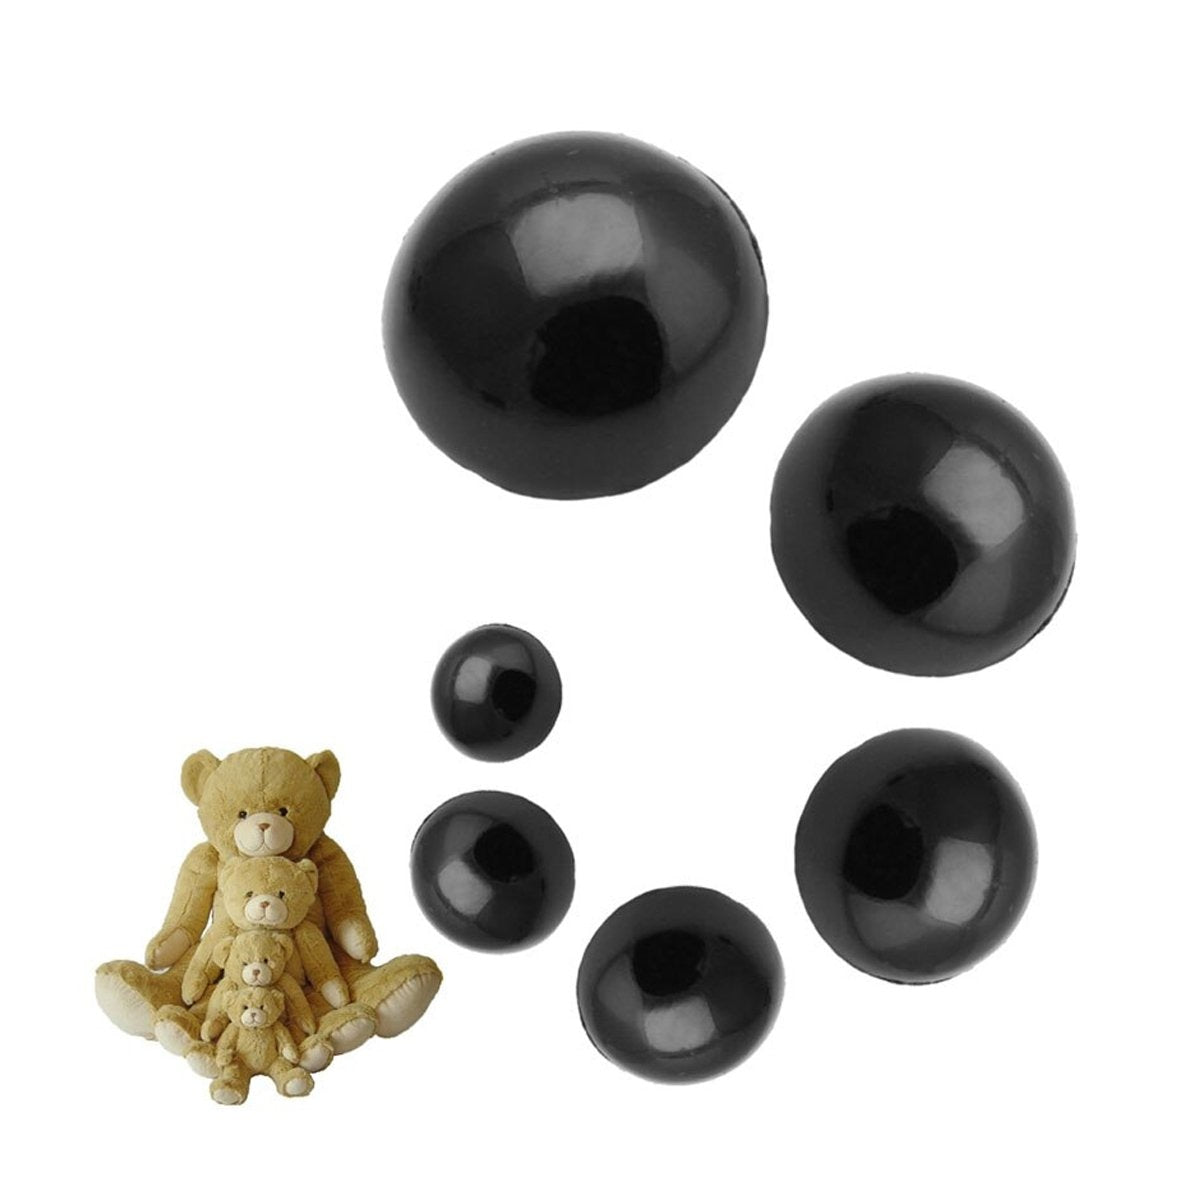 100x 9mm-25mm Buttons Round Mushroom Domed Sewing Loop Shank Black DIY Animal Eyes Toy Teddy - 9mm - - Asia Sell